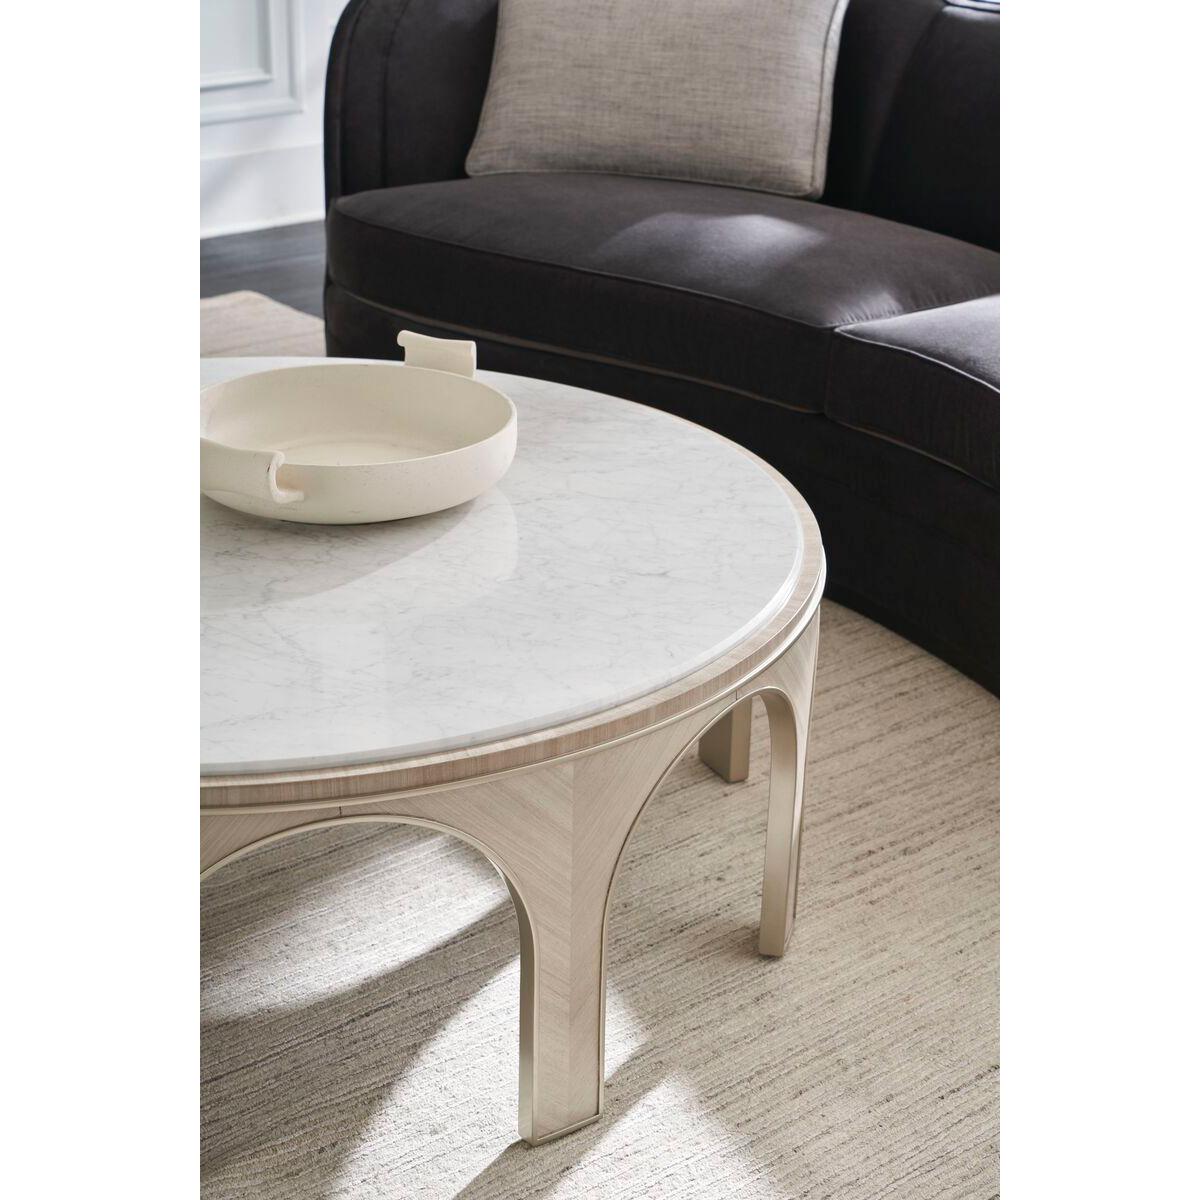 Much like the cultural center of ancient cities, the table grounds the room and invites guests to gather. With details inspired by classical architecture in Rome, it features a white marble top and Koto veneer-wrapped arches in a pearlescent